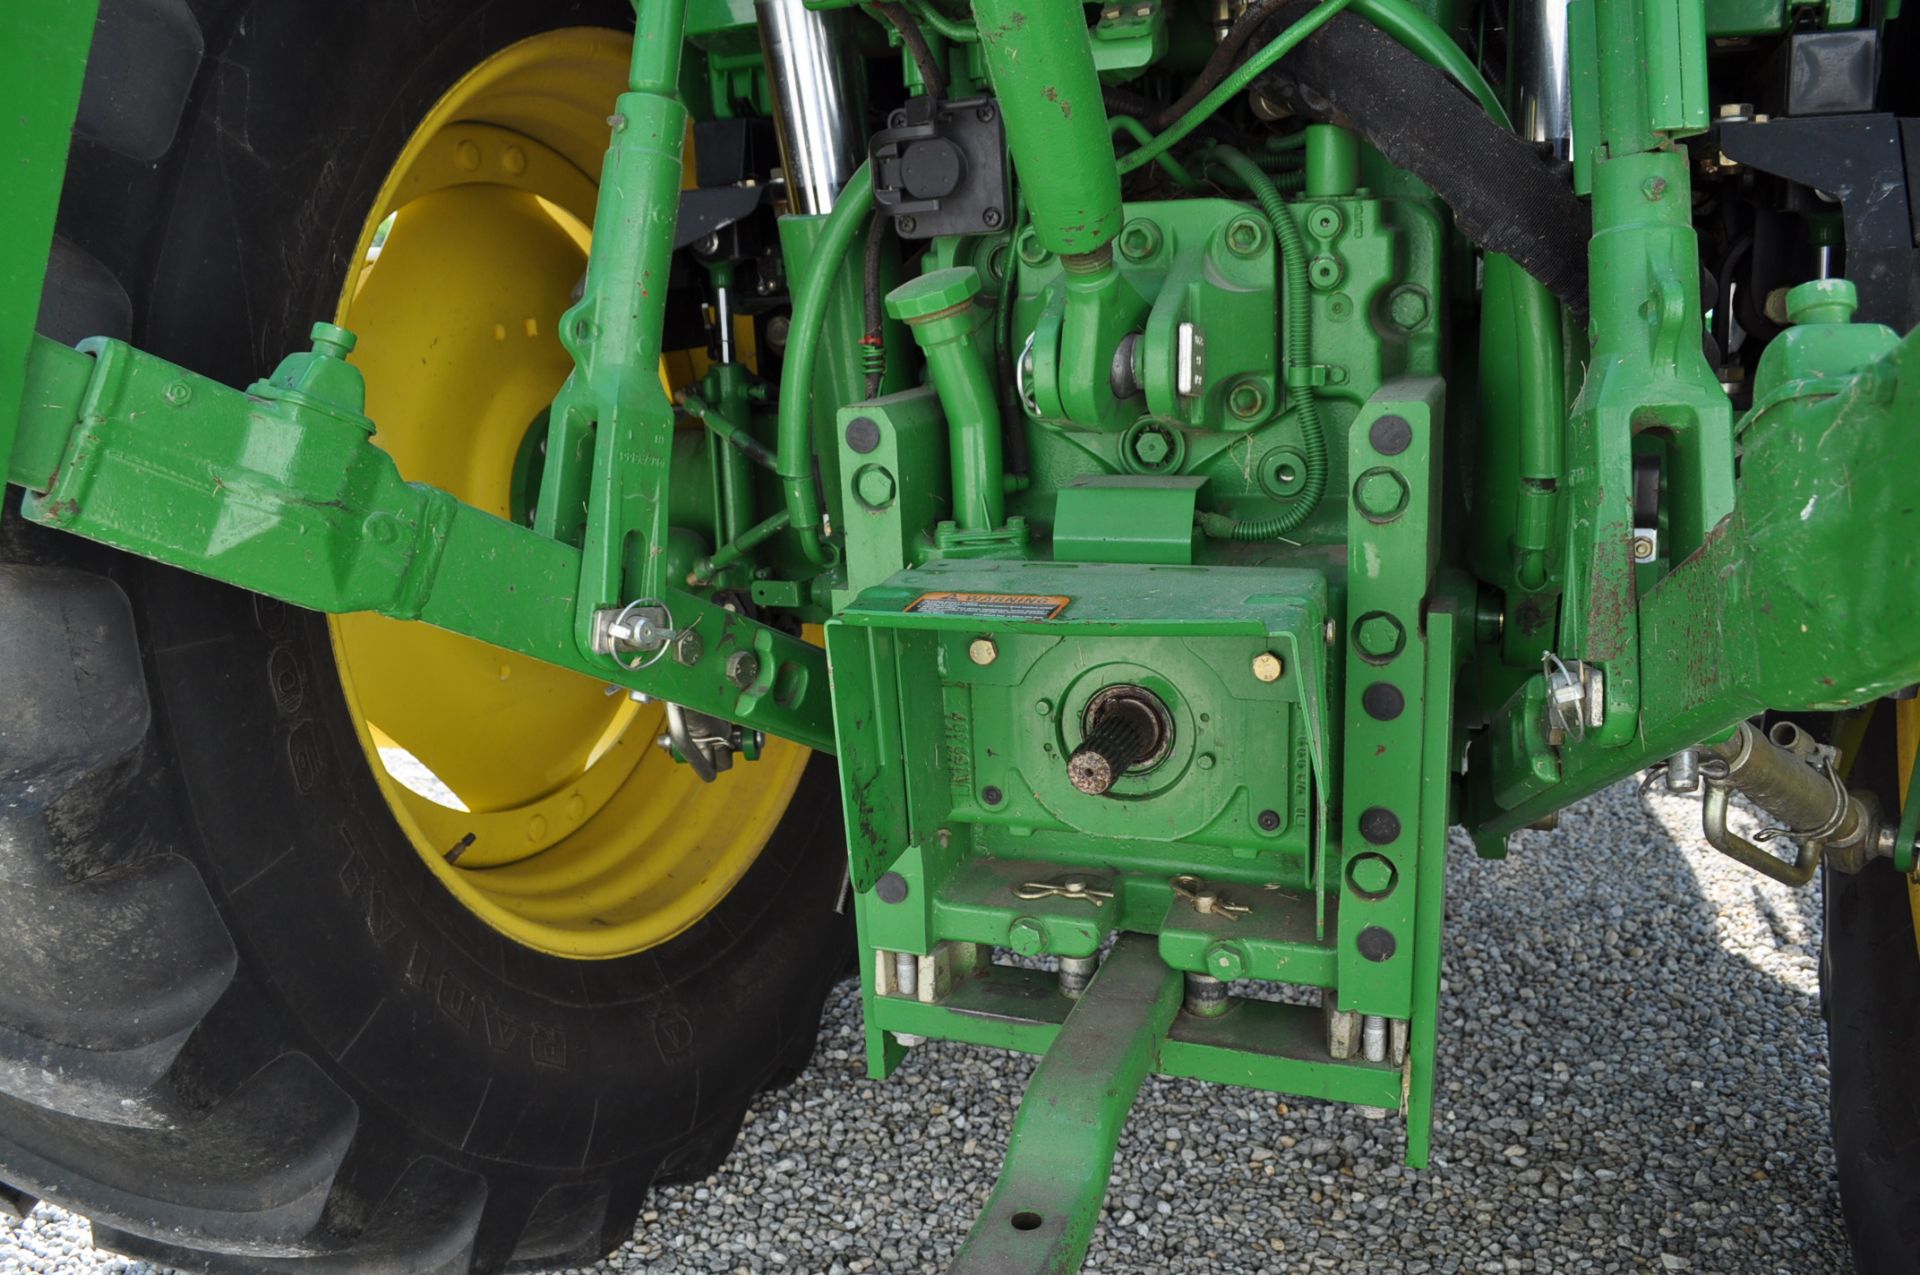 John Deere 6430 Premium tractor, MFWD, CHA, 600/65R38 rear, 540/65R24 front, IVT, front susp. - Image 11 of 18